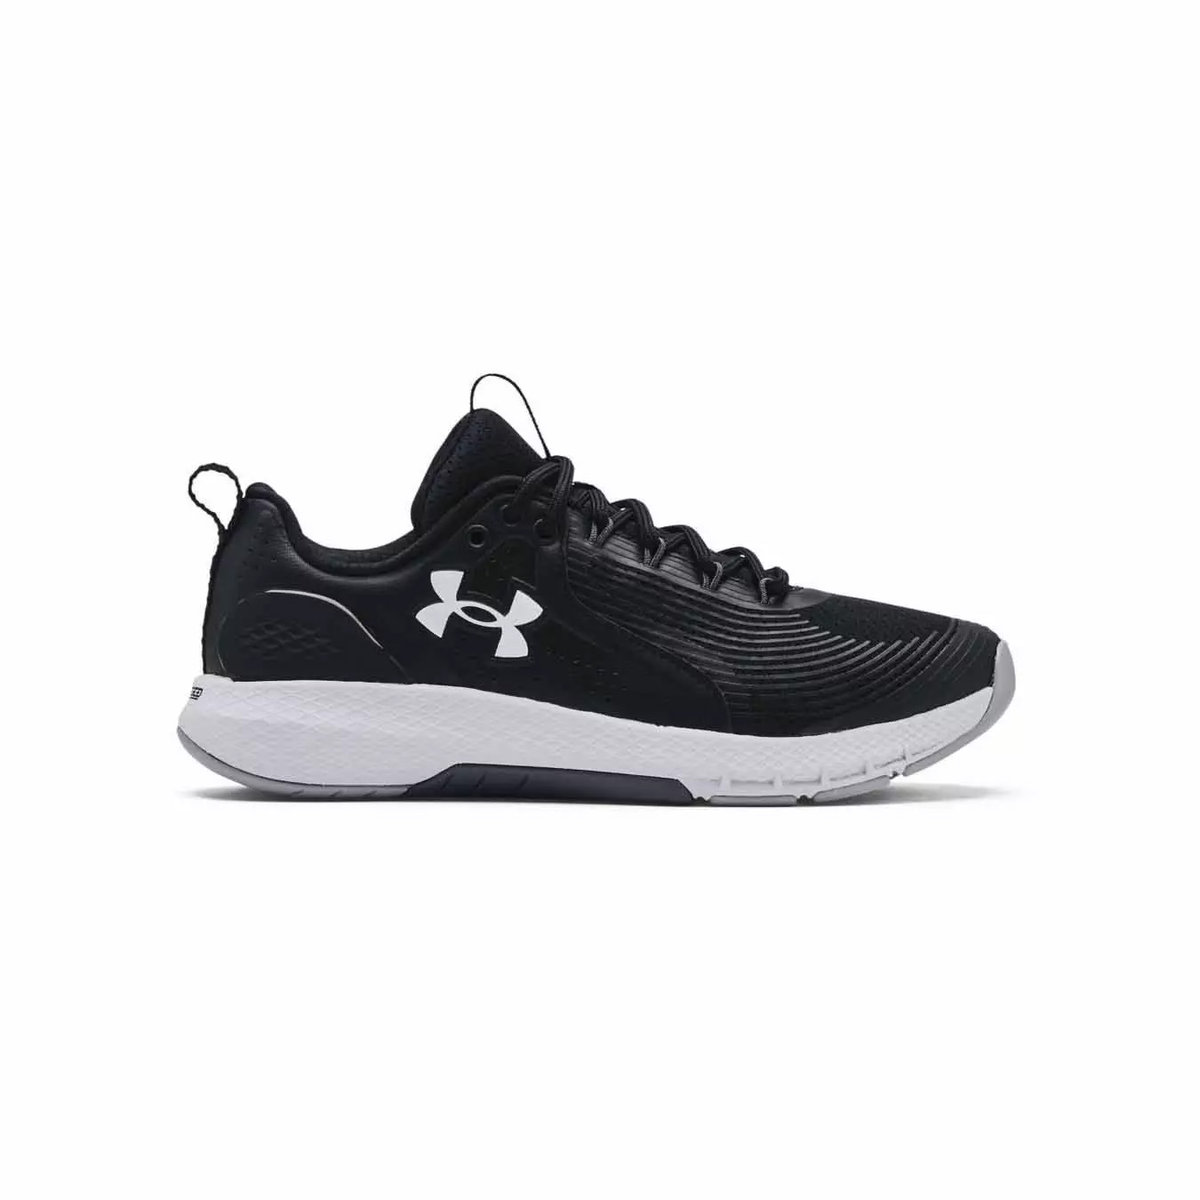 Buty treningowe męskie Under Armour Charged Commit TR 3